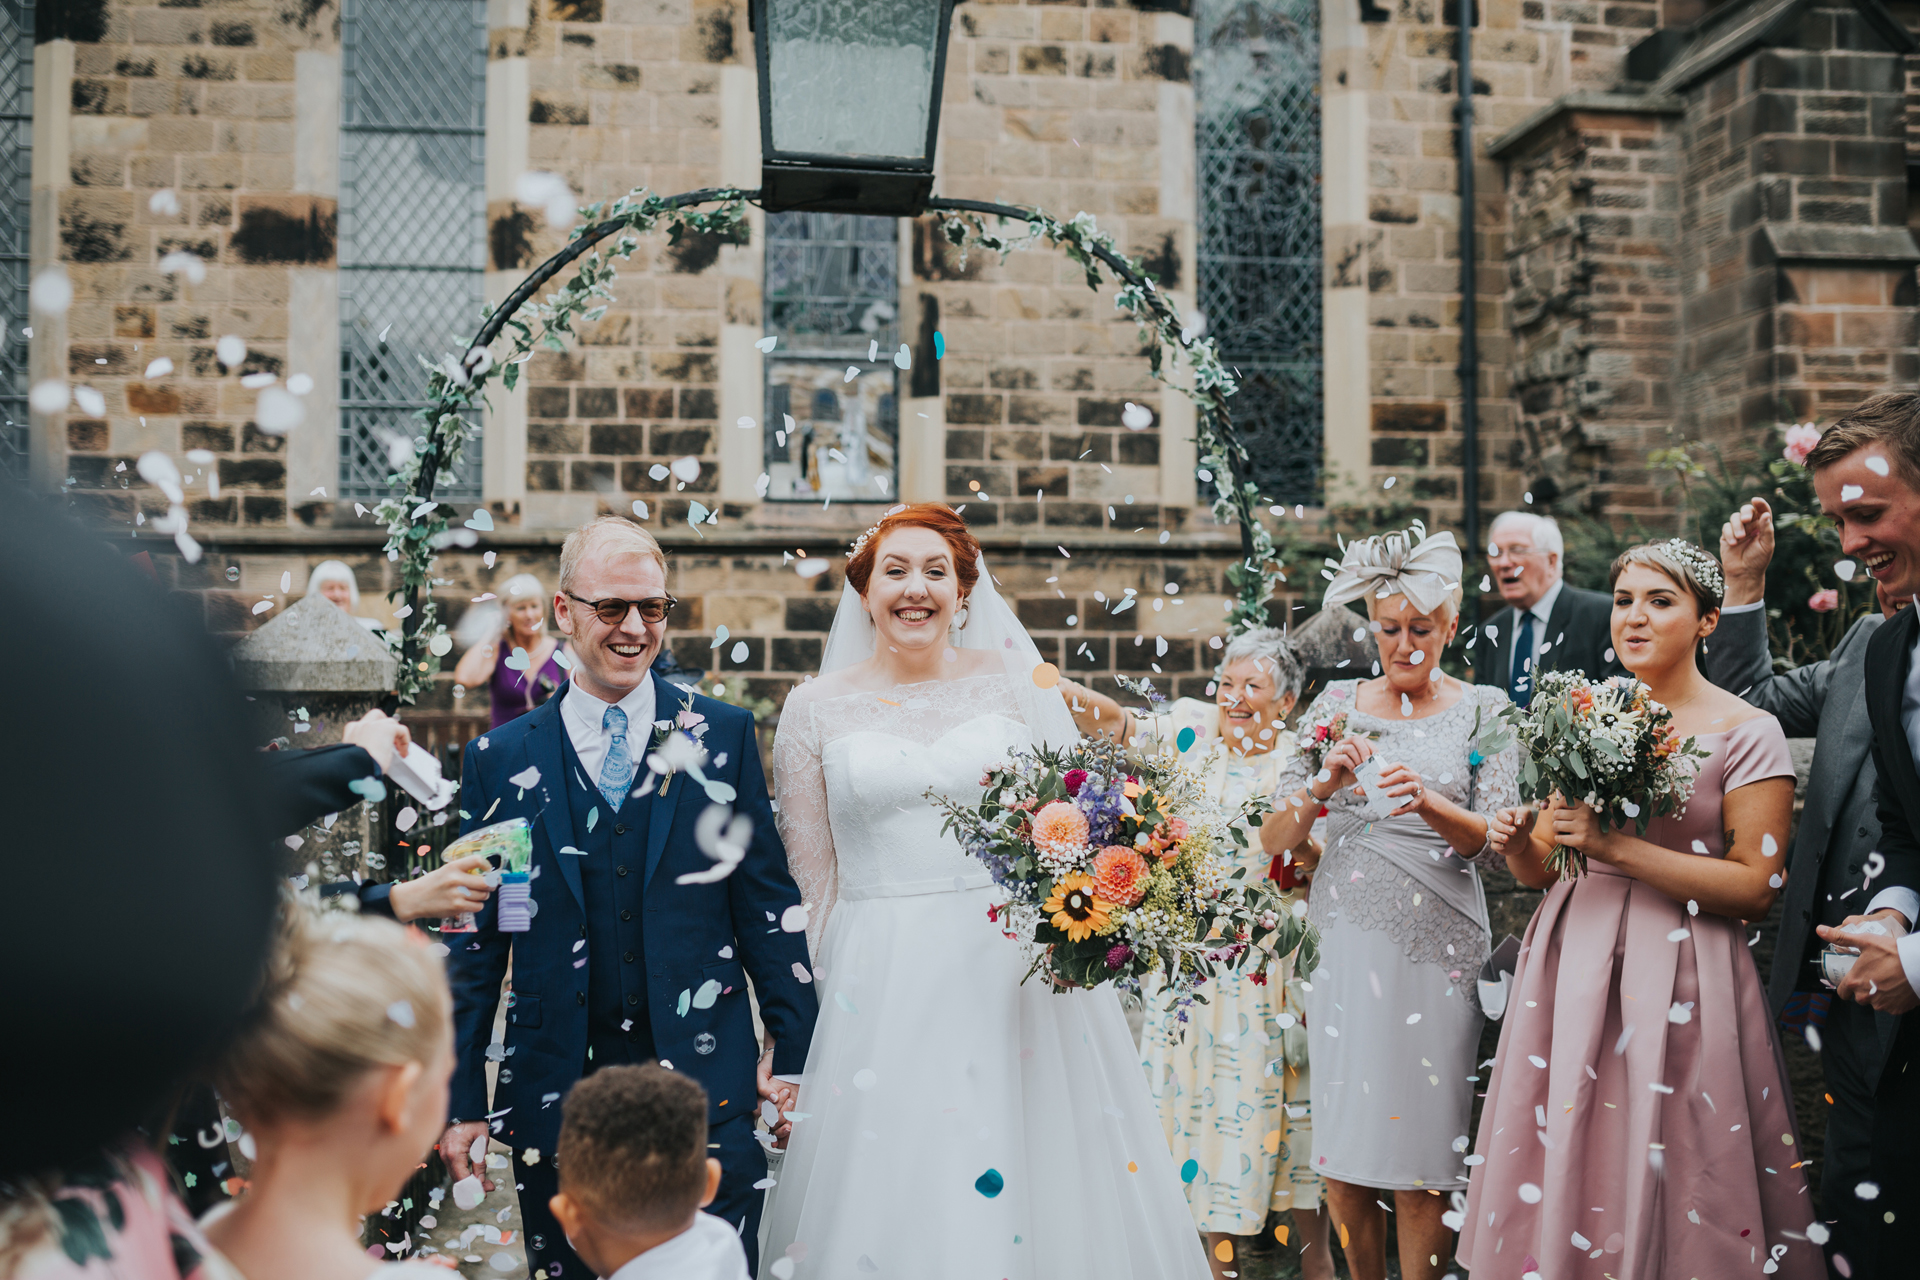 Guests surround bride and groom as they throw confetti at them at St Thomas Church Liverpool